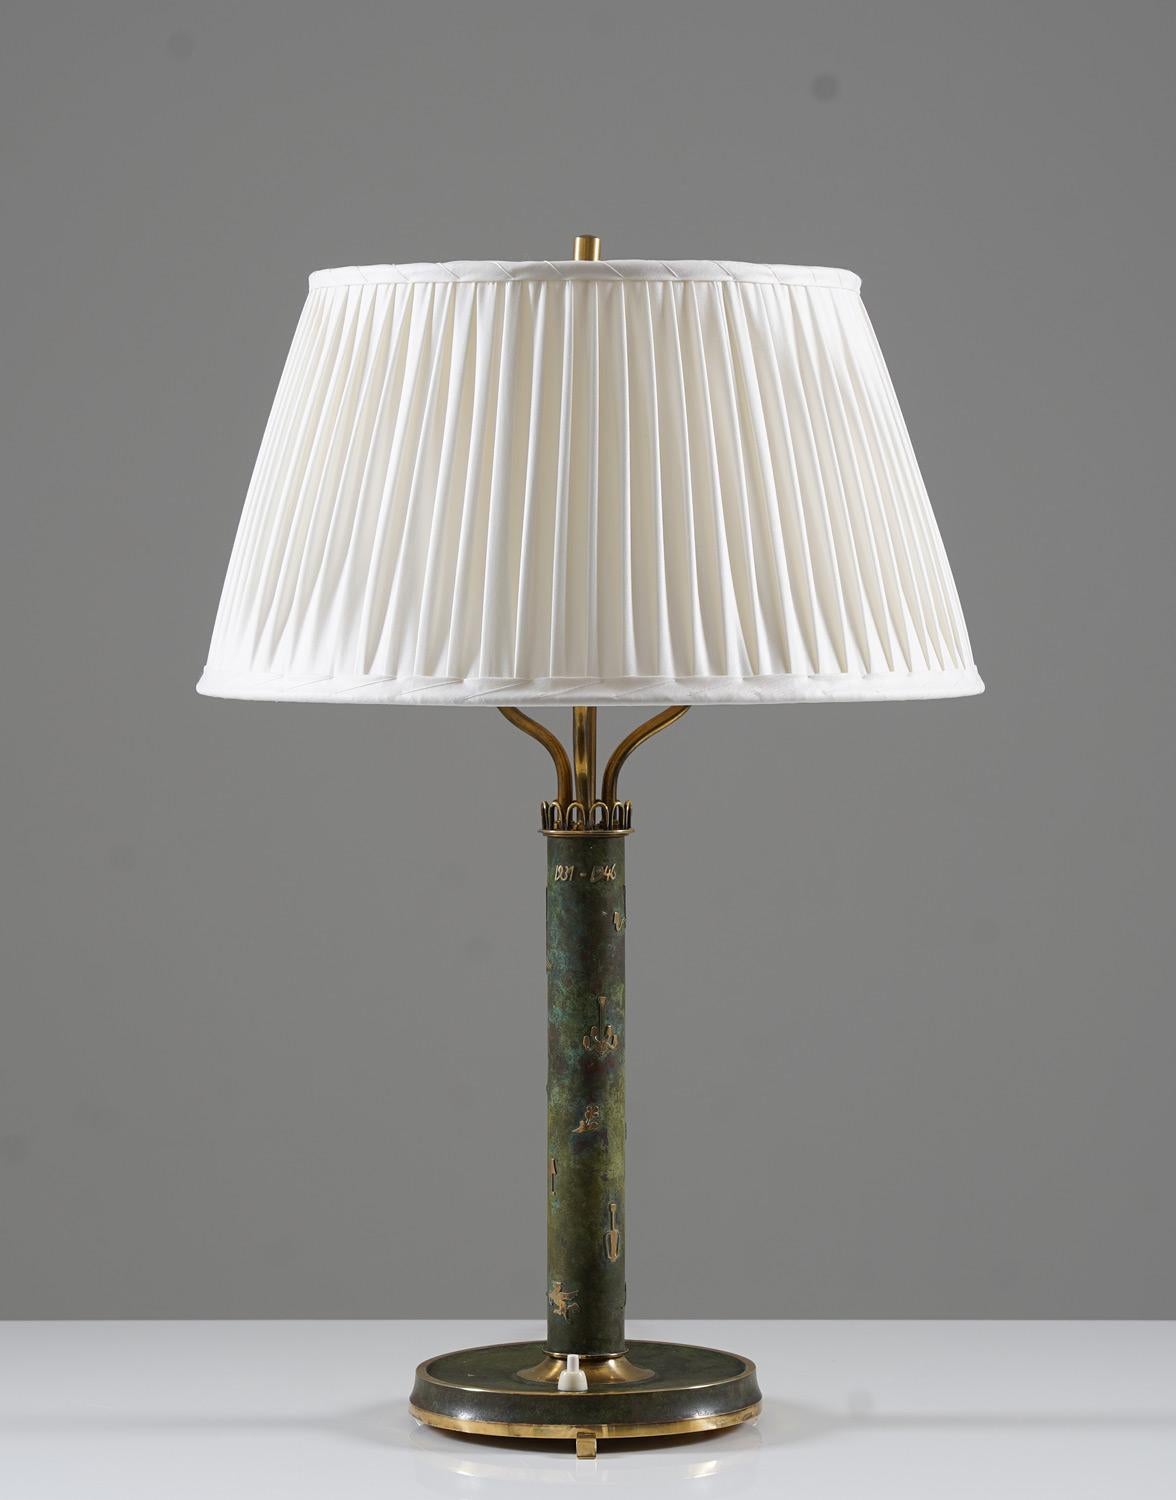 Table lamp manufactured by Liberty, Sweden, 1946. 
This lamp is most likely an in-house production, made in low numbers or even unique. The stem is decorated with different lamp models made by the company and on top it says 